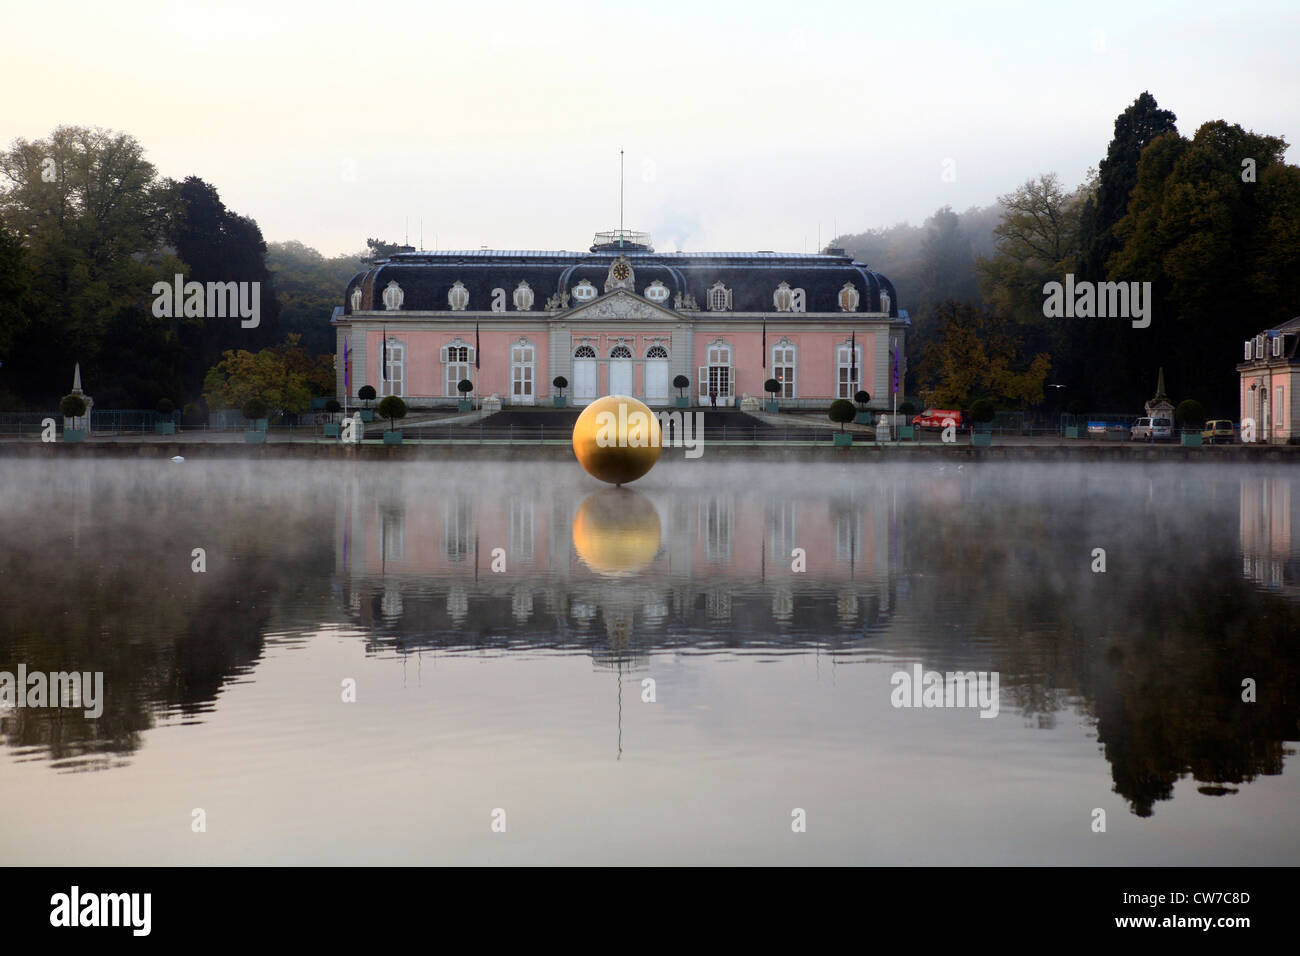 Benrath castle reflecting in a pond with golden bowl, Germany, North Rhine-Westphalia, Duesseldorf Stock Photo